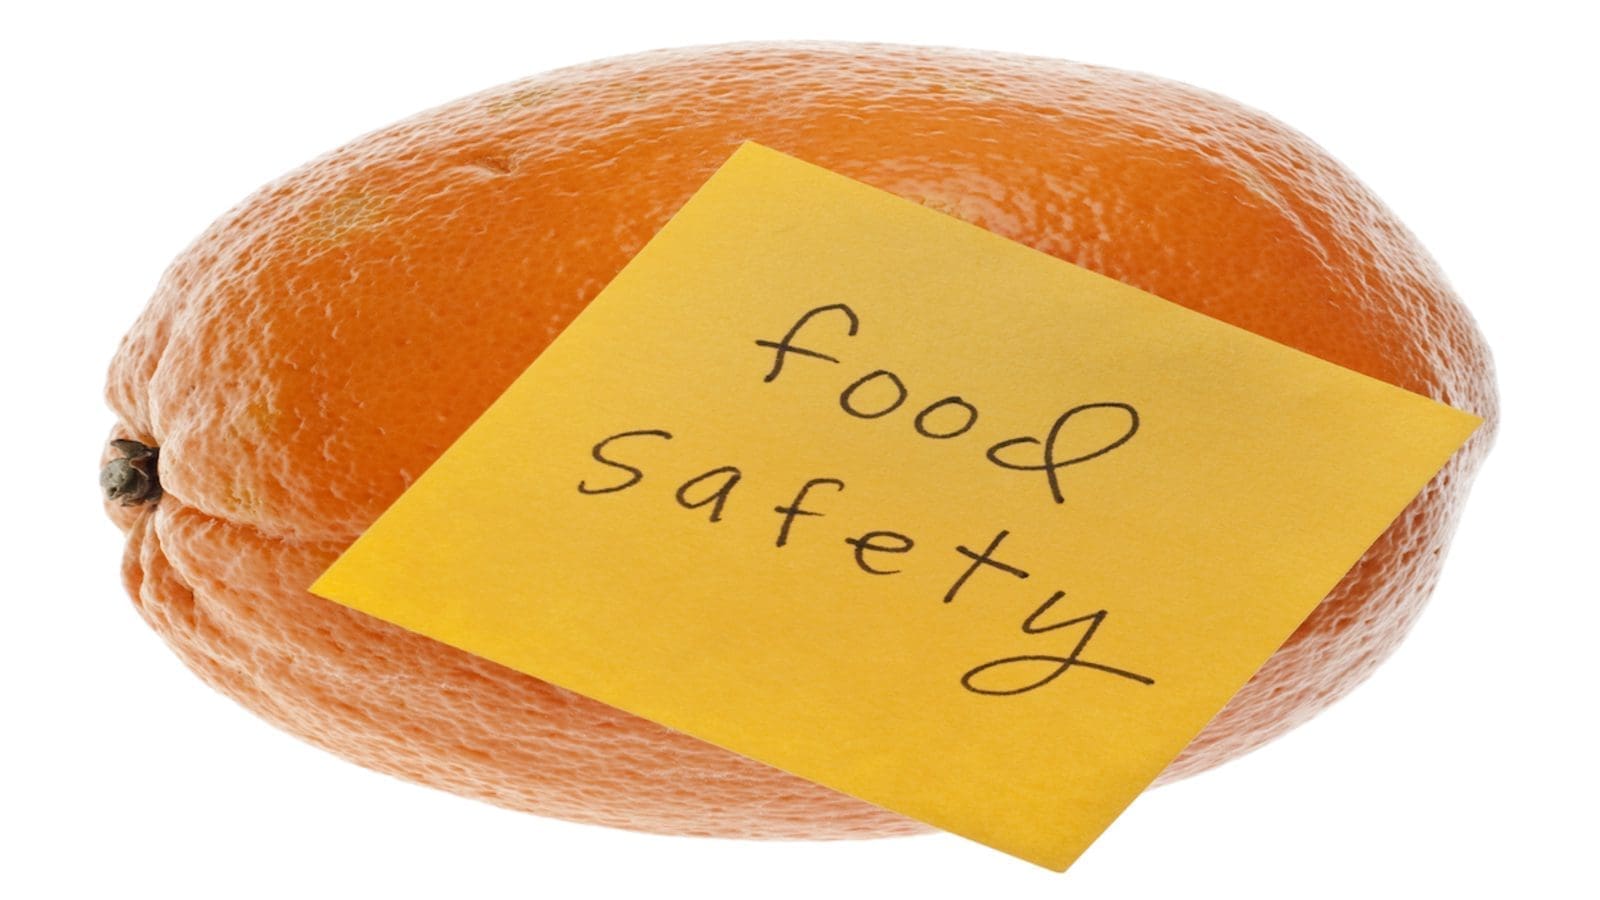 Center for Produce Safety funds 12 food safety research projects